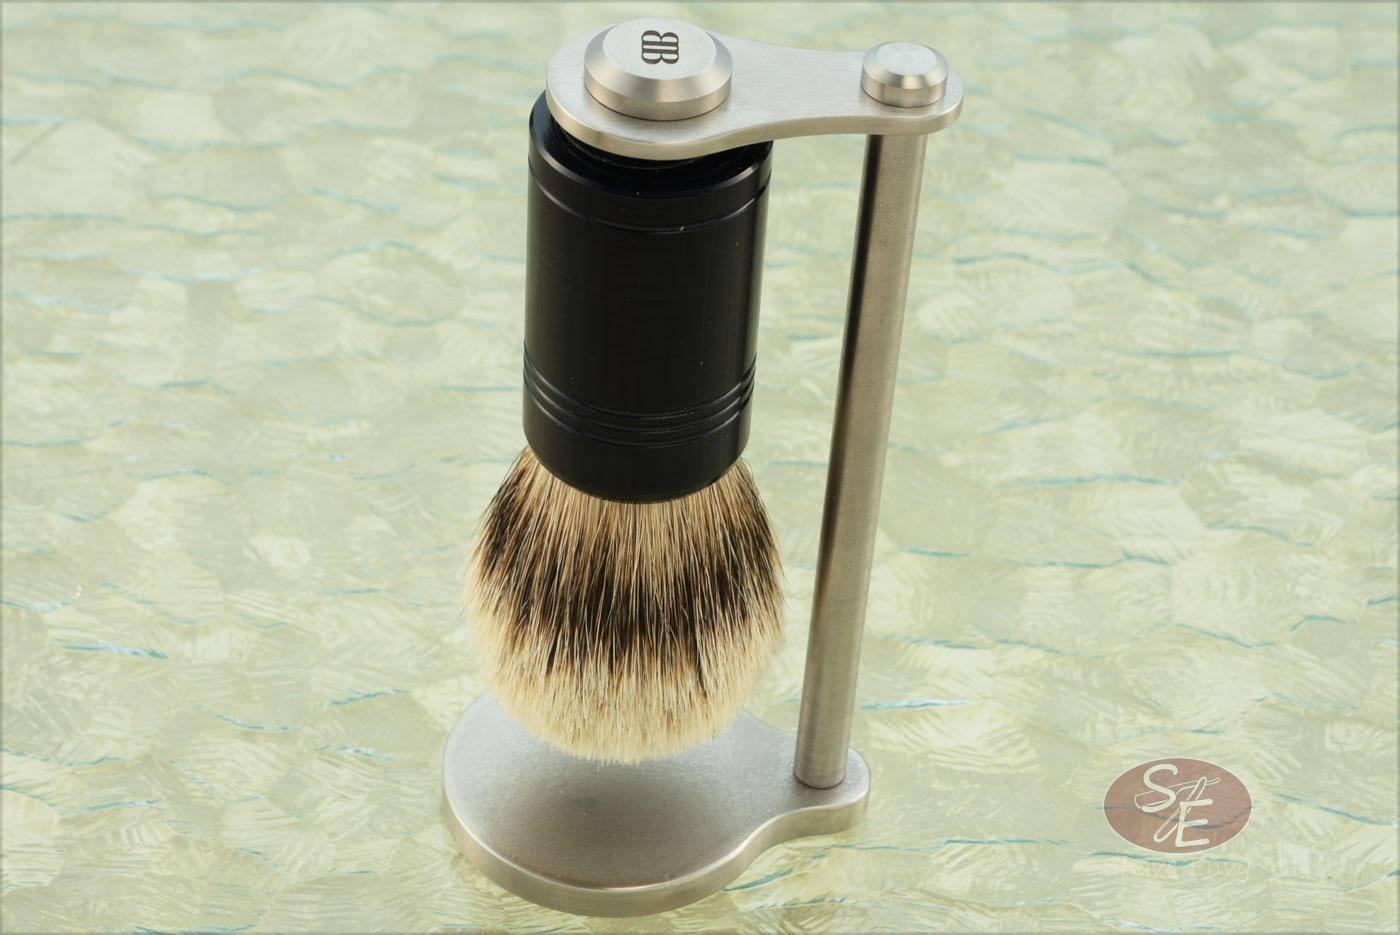 Silvertip Shaving Brush with Magnetic Stand - Black Aluminum (24mm Knot)